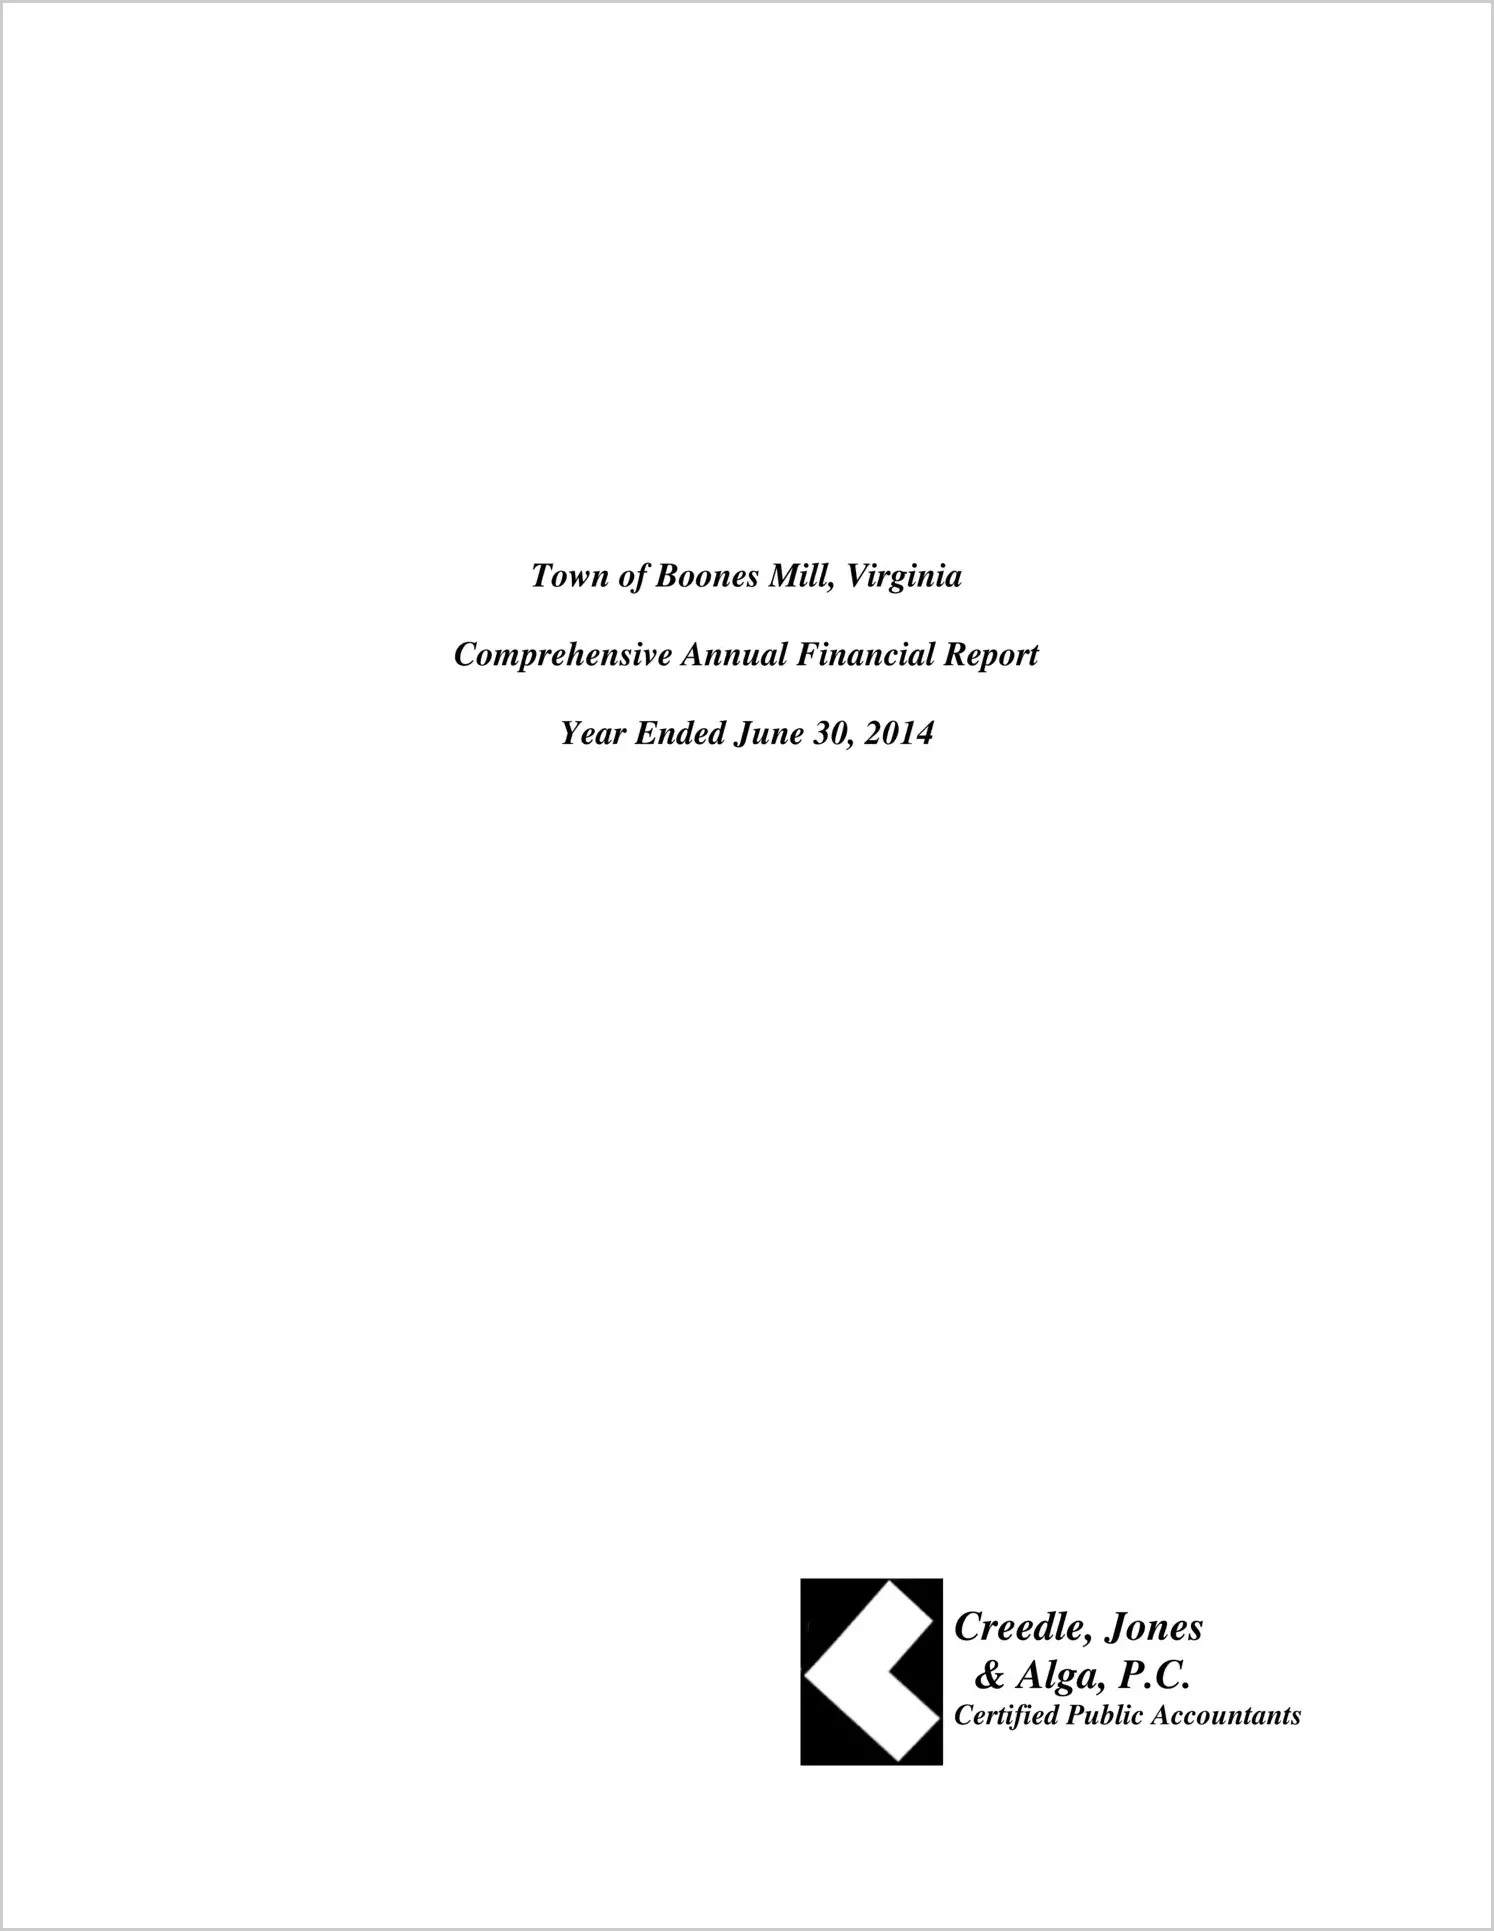 2014 Annual Financial Report for Town of Boones Mill